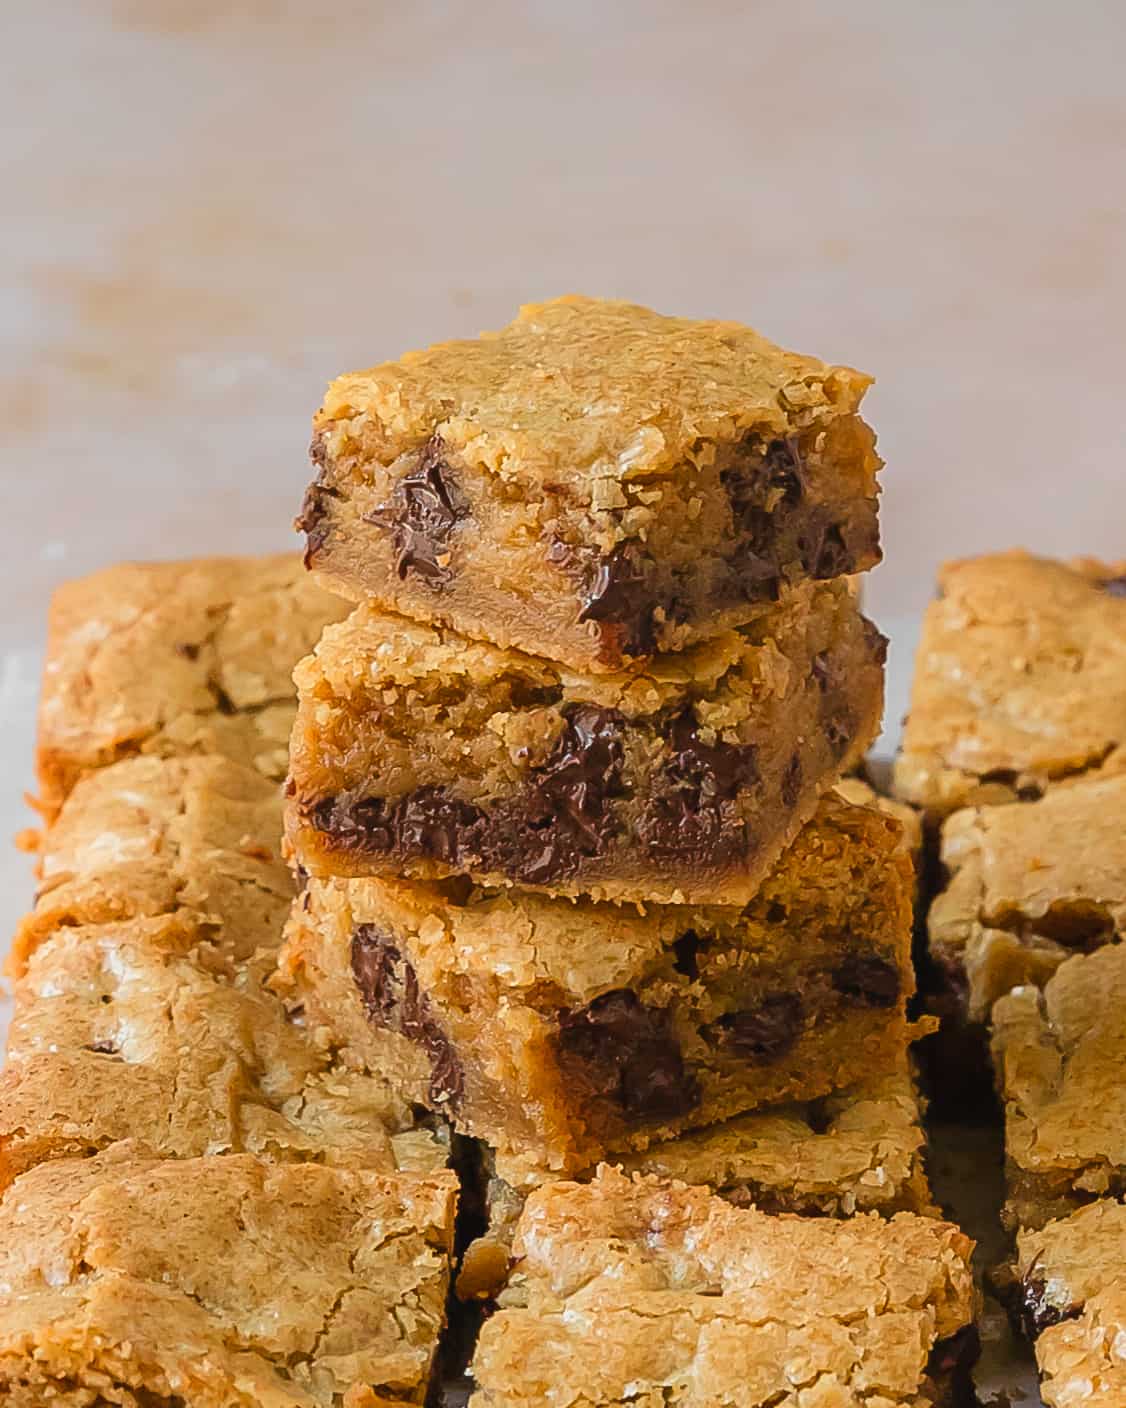 Brown butter blondies are thick and chewy blondie brownies with delicate crackle tops.  These simple blondies are filled with nutty browned butter flavor which pairs perfectly with the caramel, butterscotch and vanilla that is classic in the best blondies. Add a handful of chocolate chips for even more drool worthy flavor.